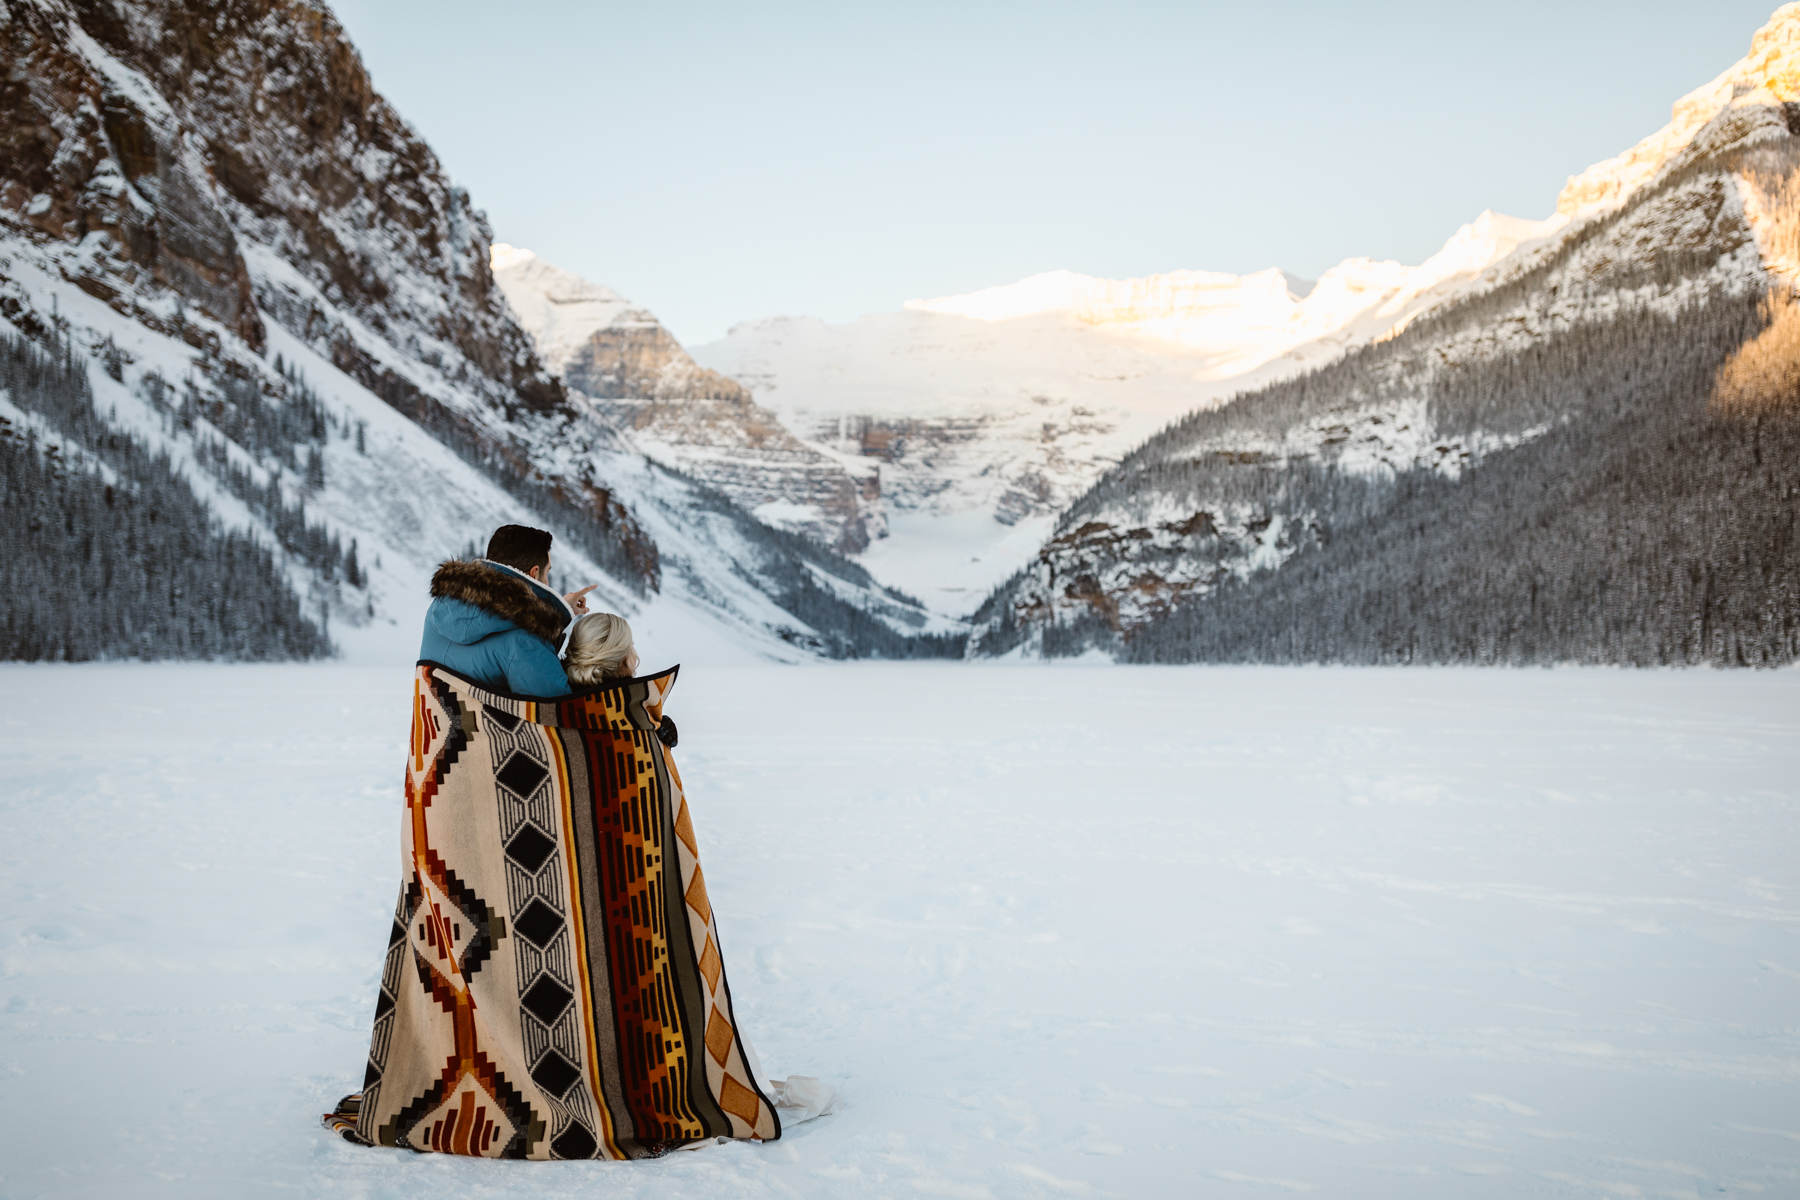 Fairmont Chateau Lake Louise Wedding Photography in Winter - Image 3